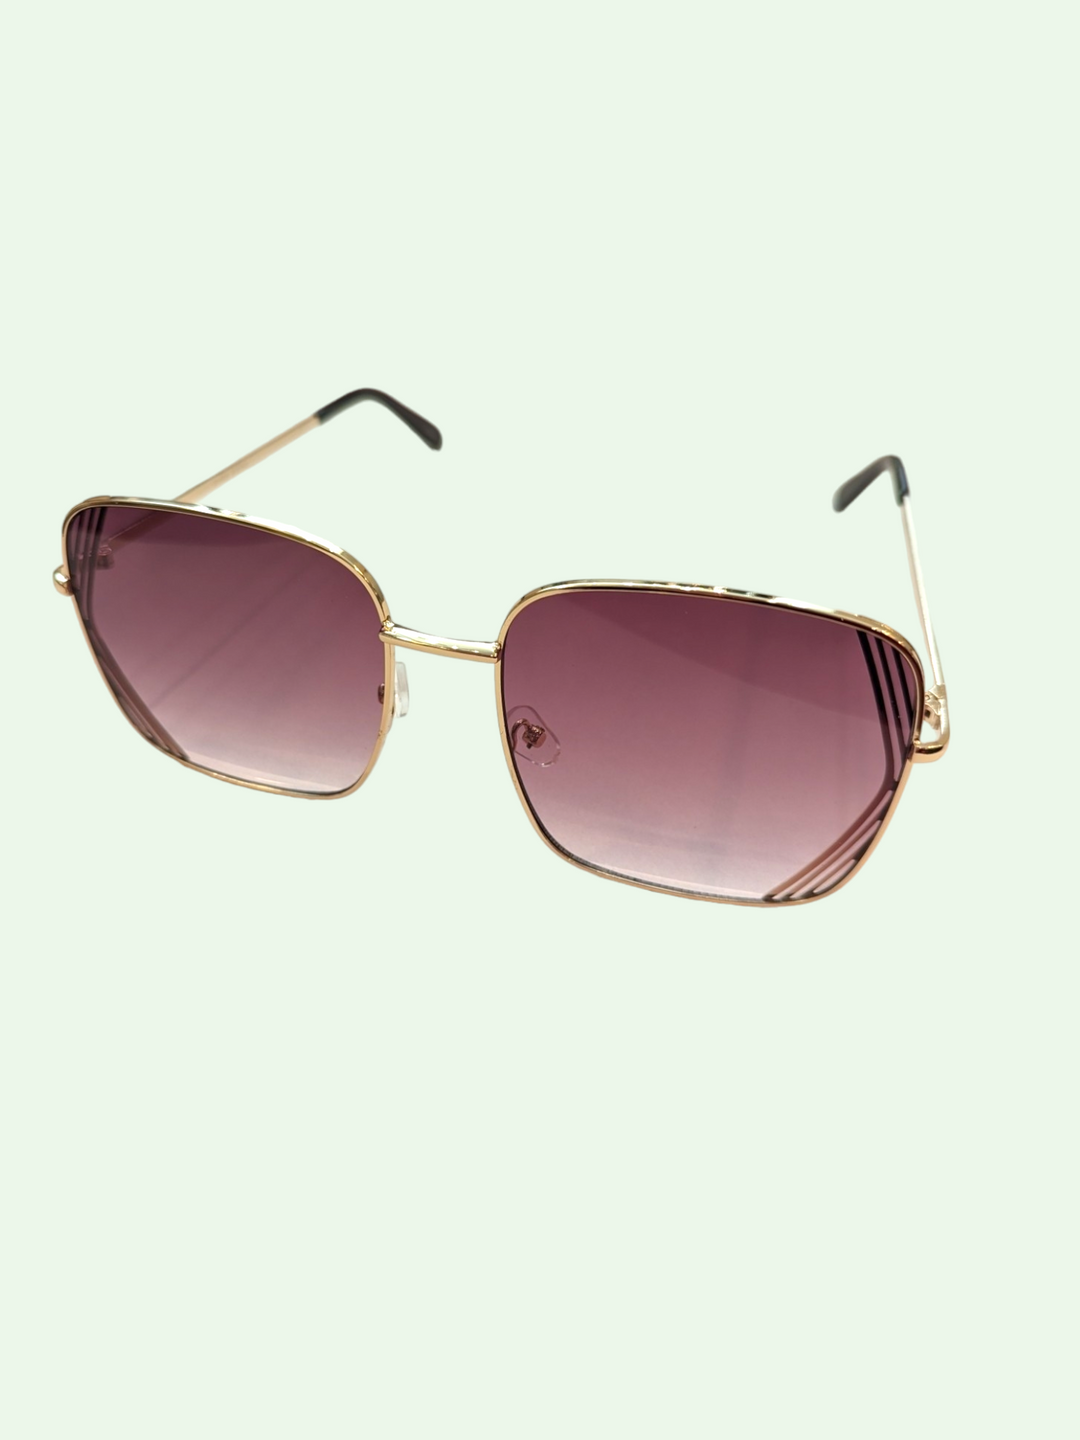 the hollywood and vine sunglasses in deep wine